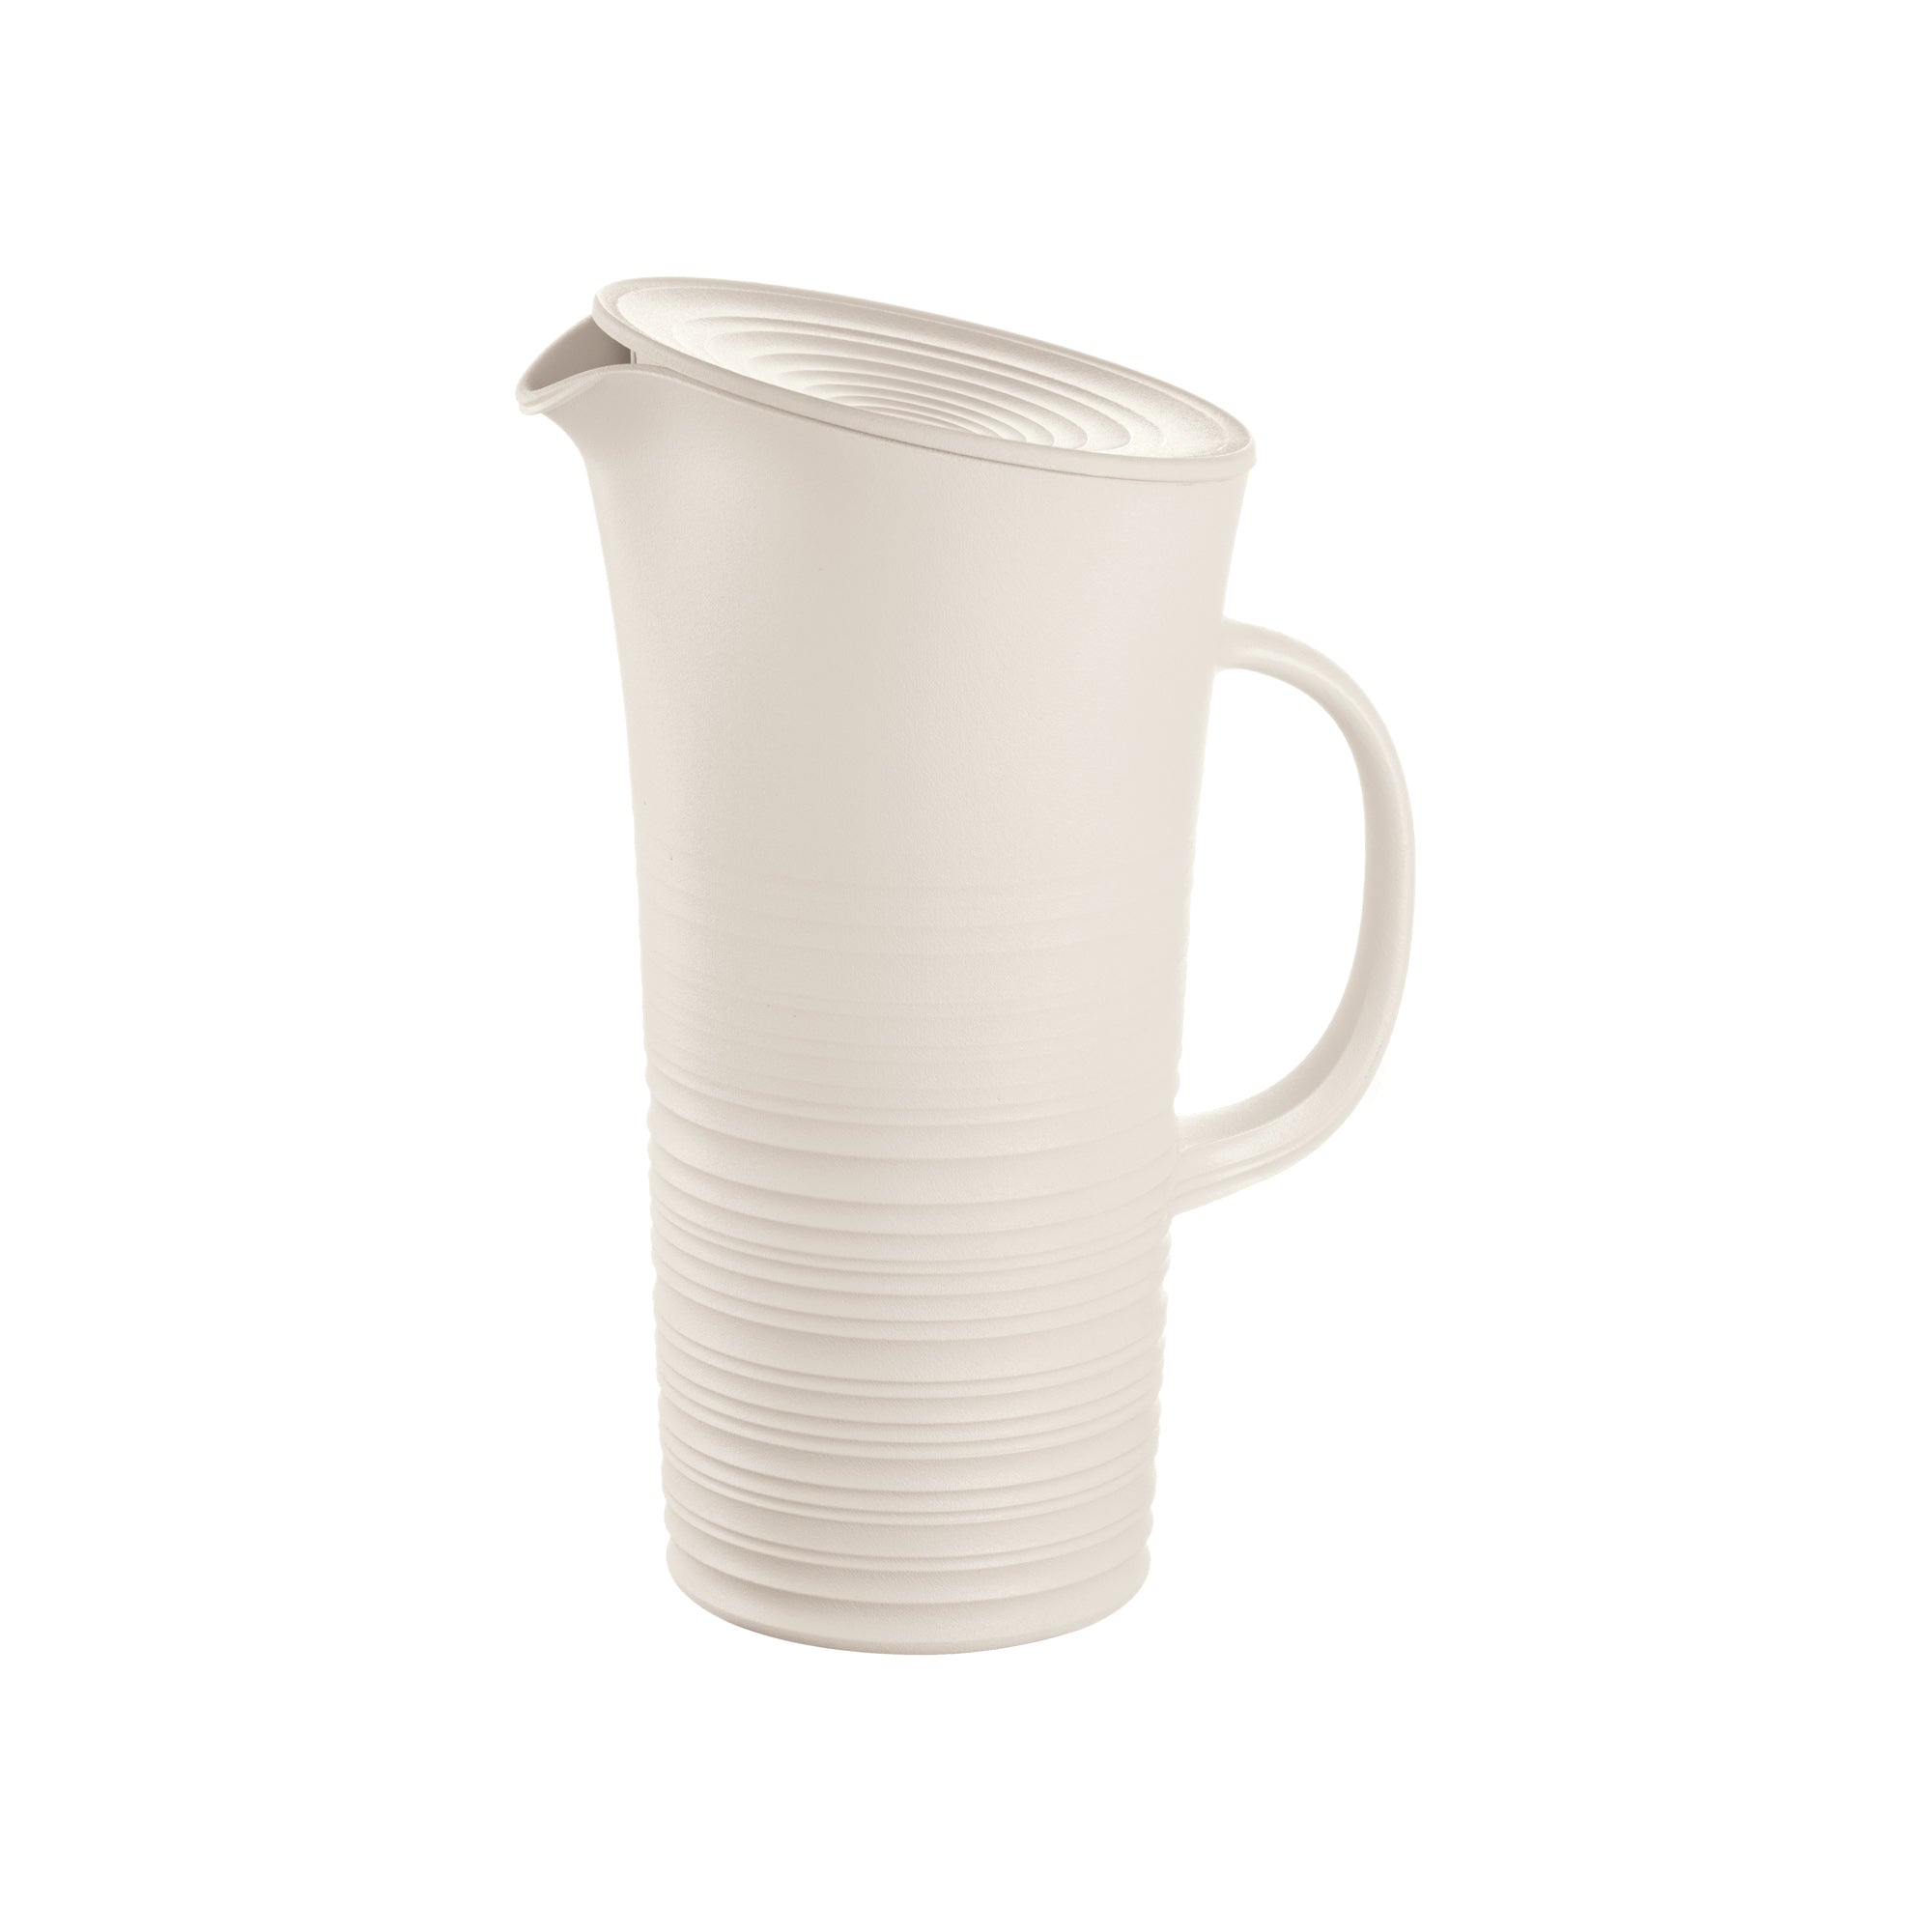 PITCHER WITH LID "TIERRA"